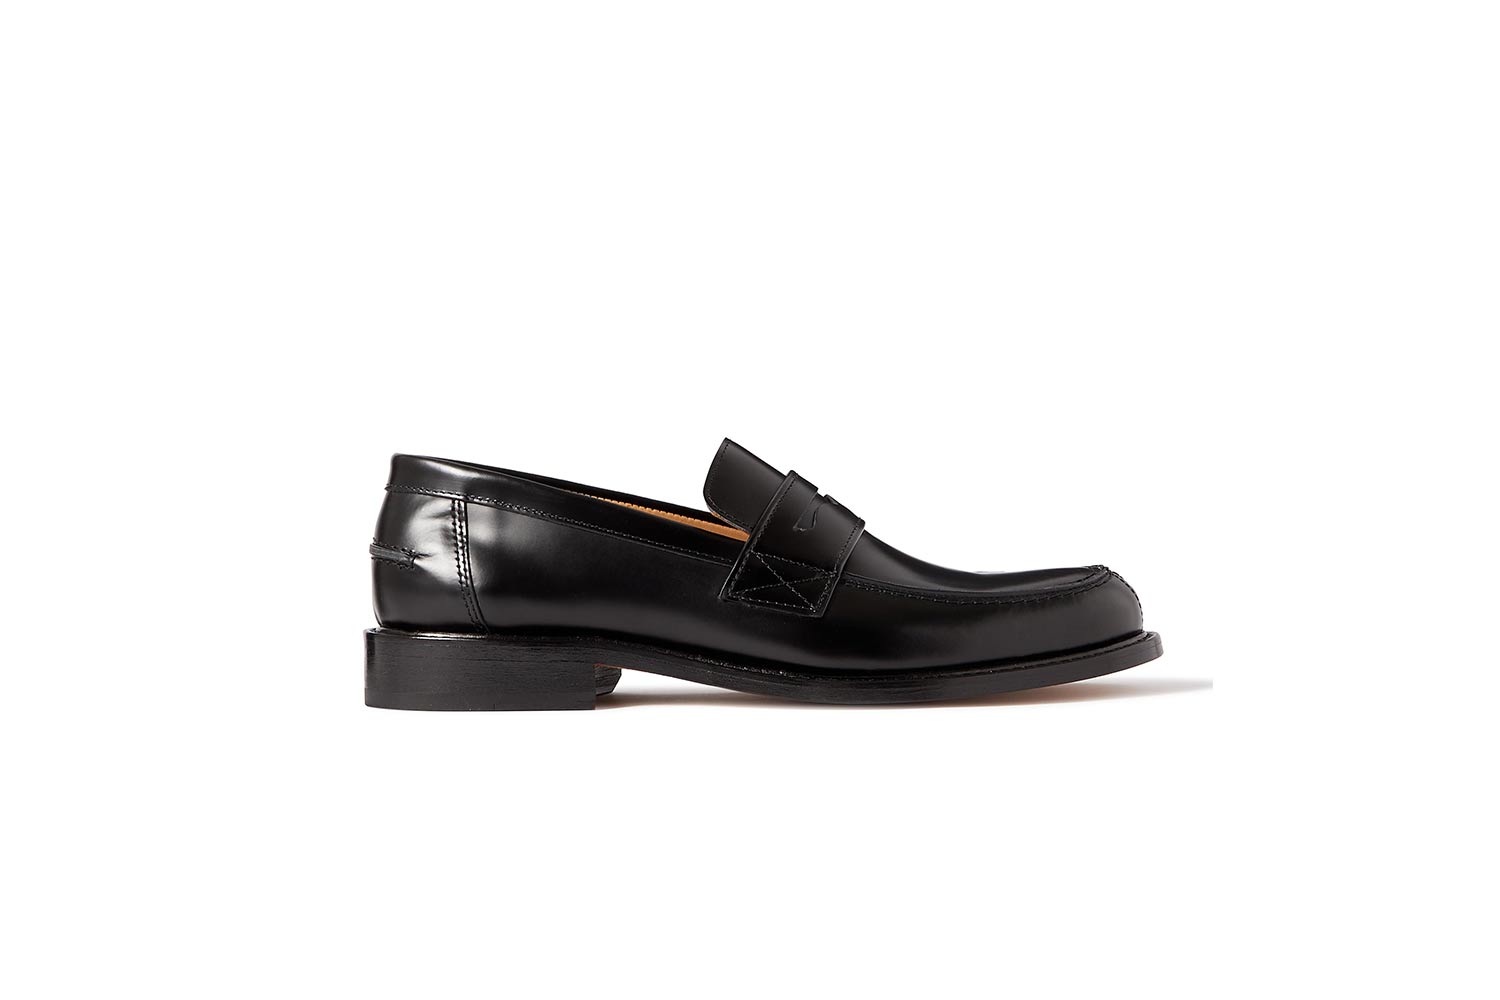 Black leather loafers on a white background